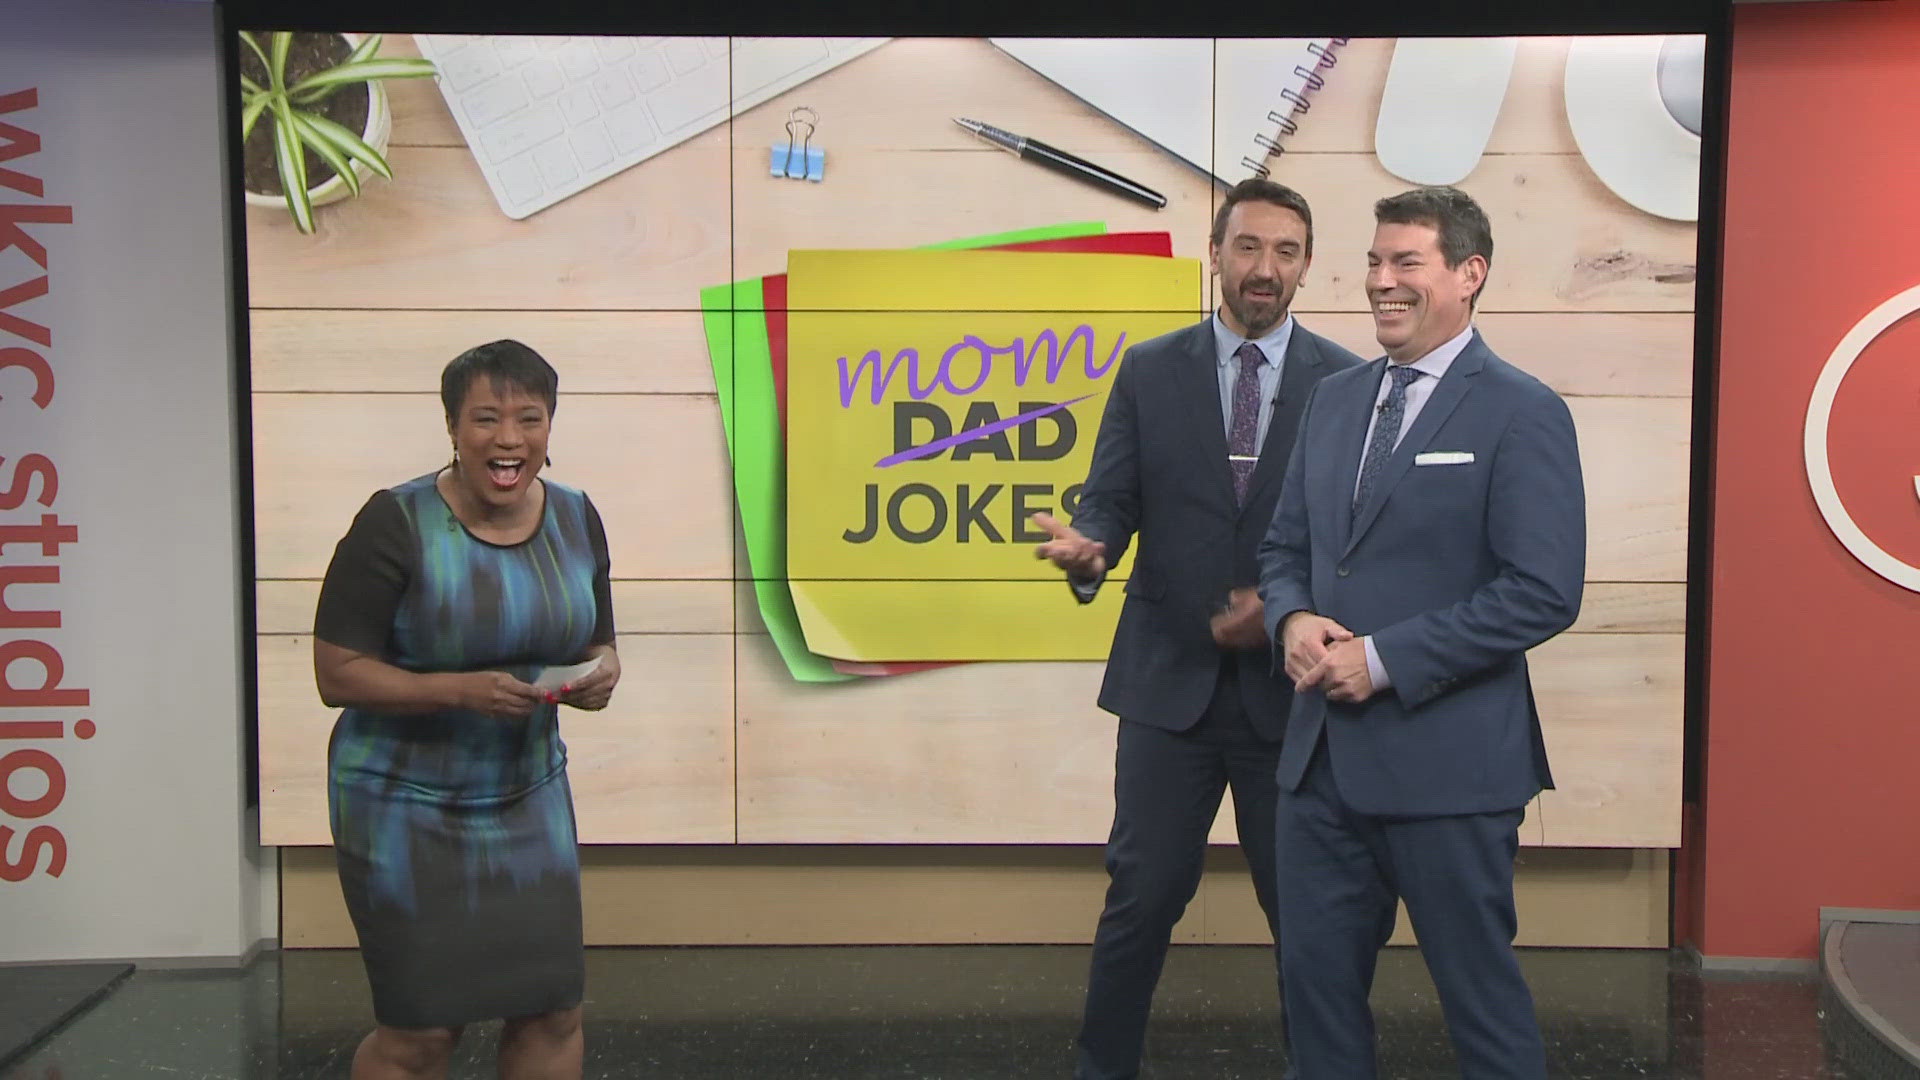 3News' Danita Harris gives us a trio of mom jokes ahead of Mother's Day weekend. Enjoy the laughs!